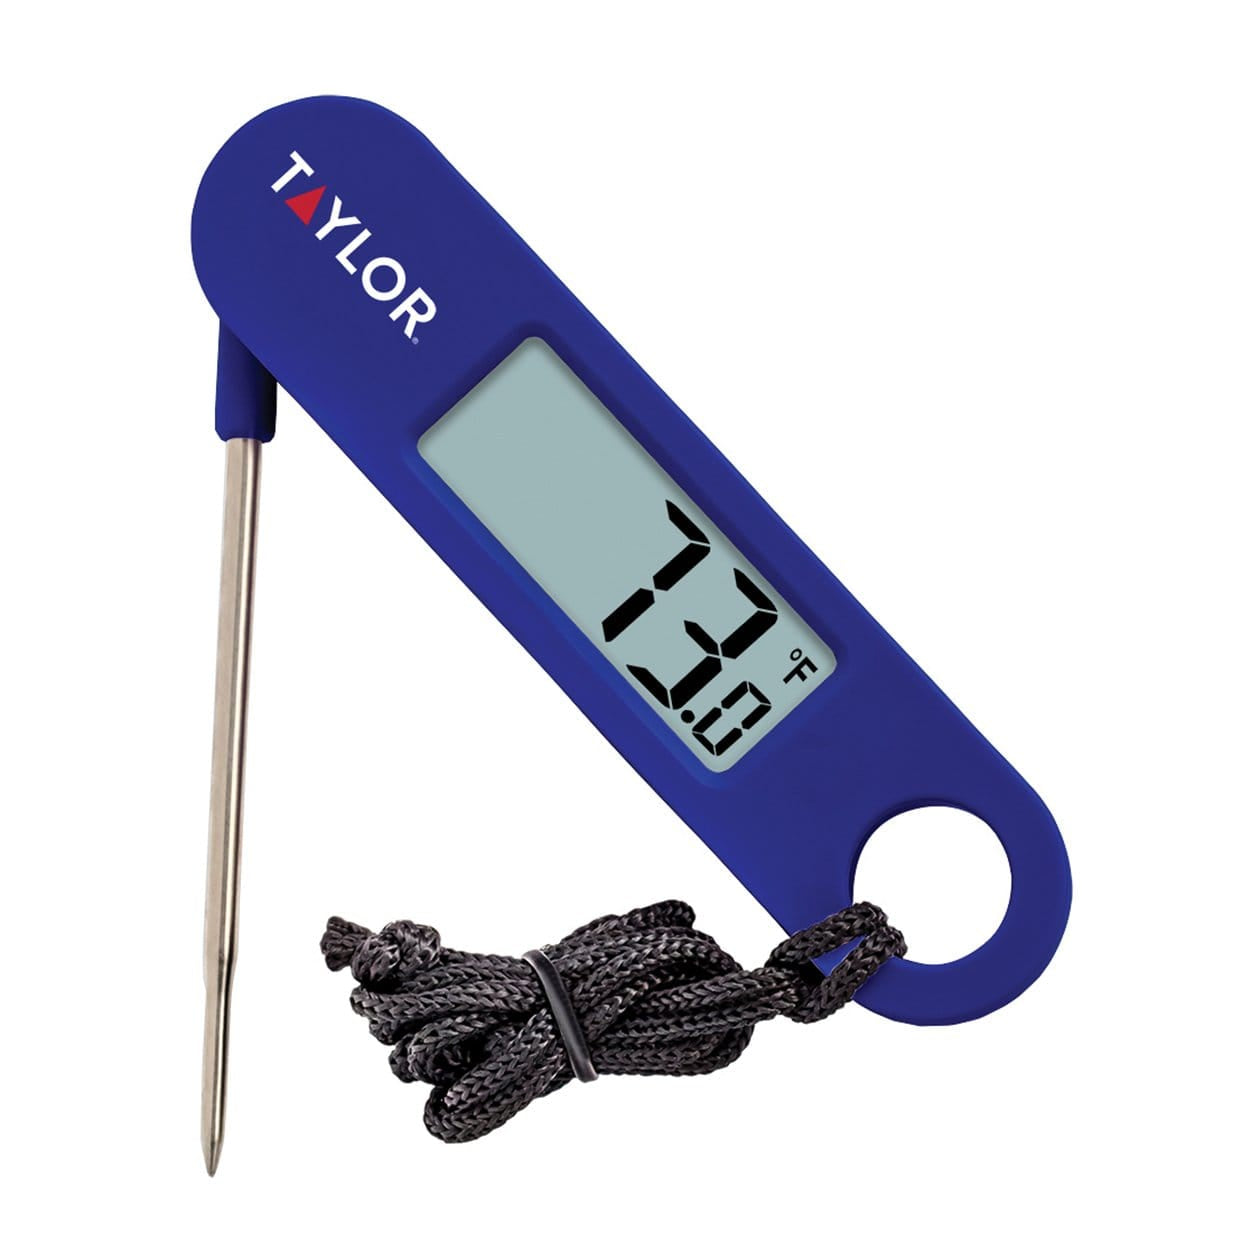 Compact Folding Thermometer, 1476FDA